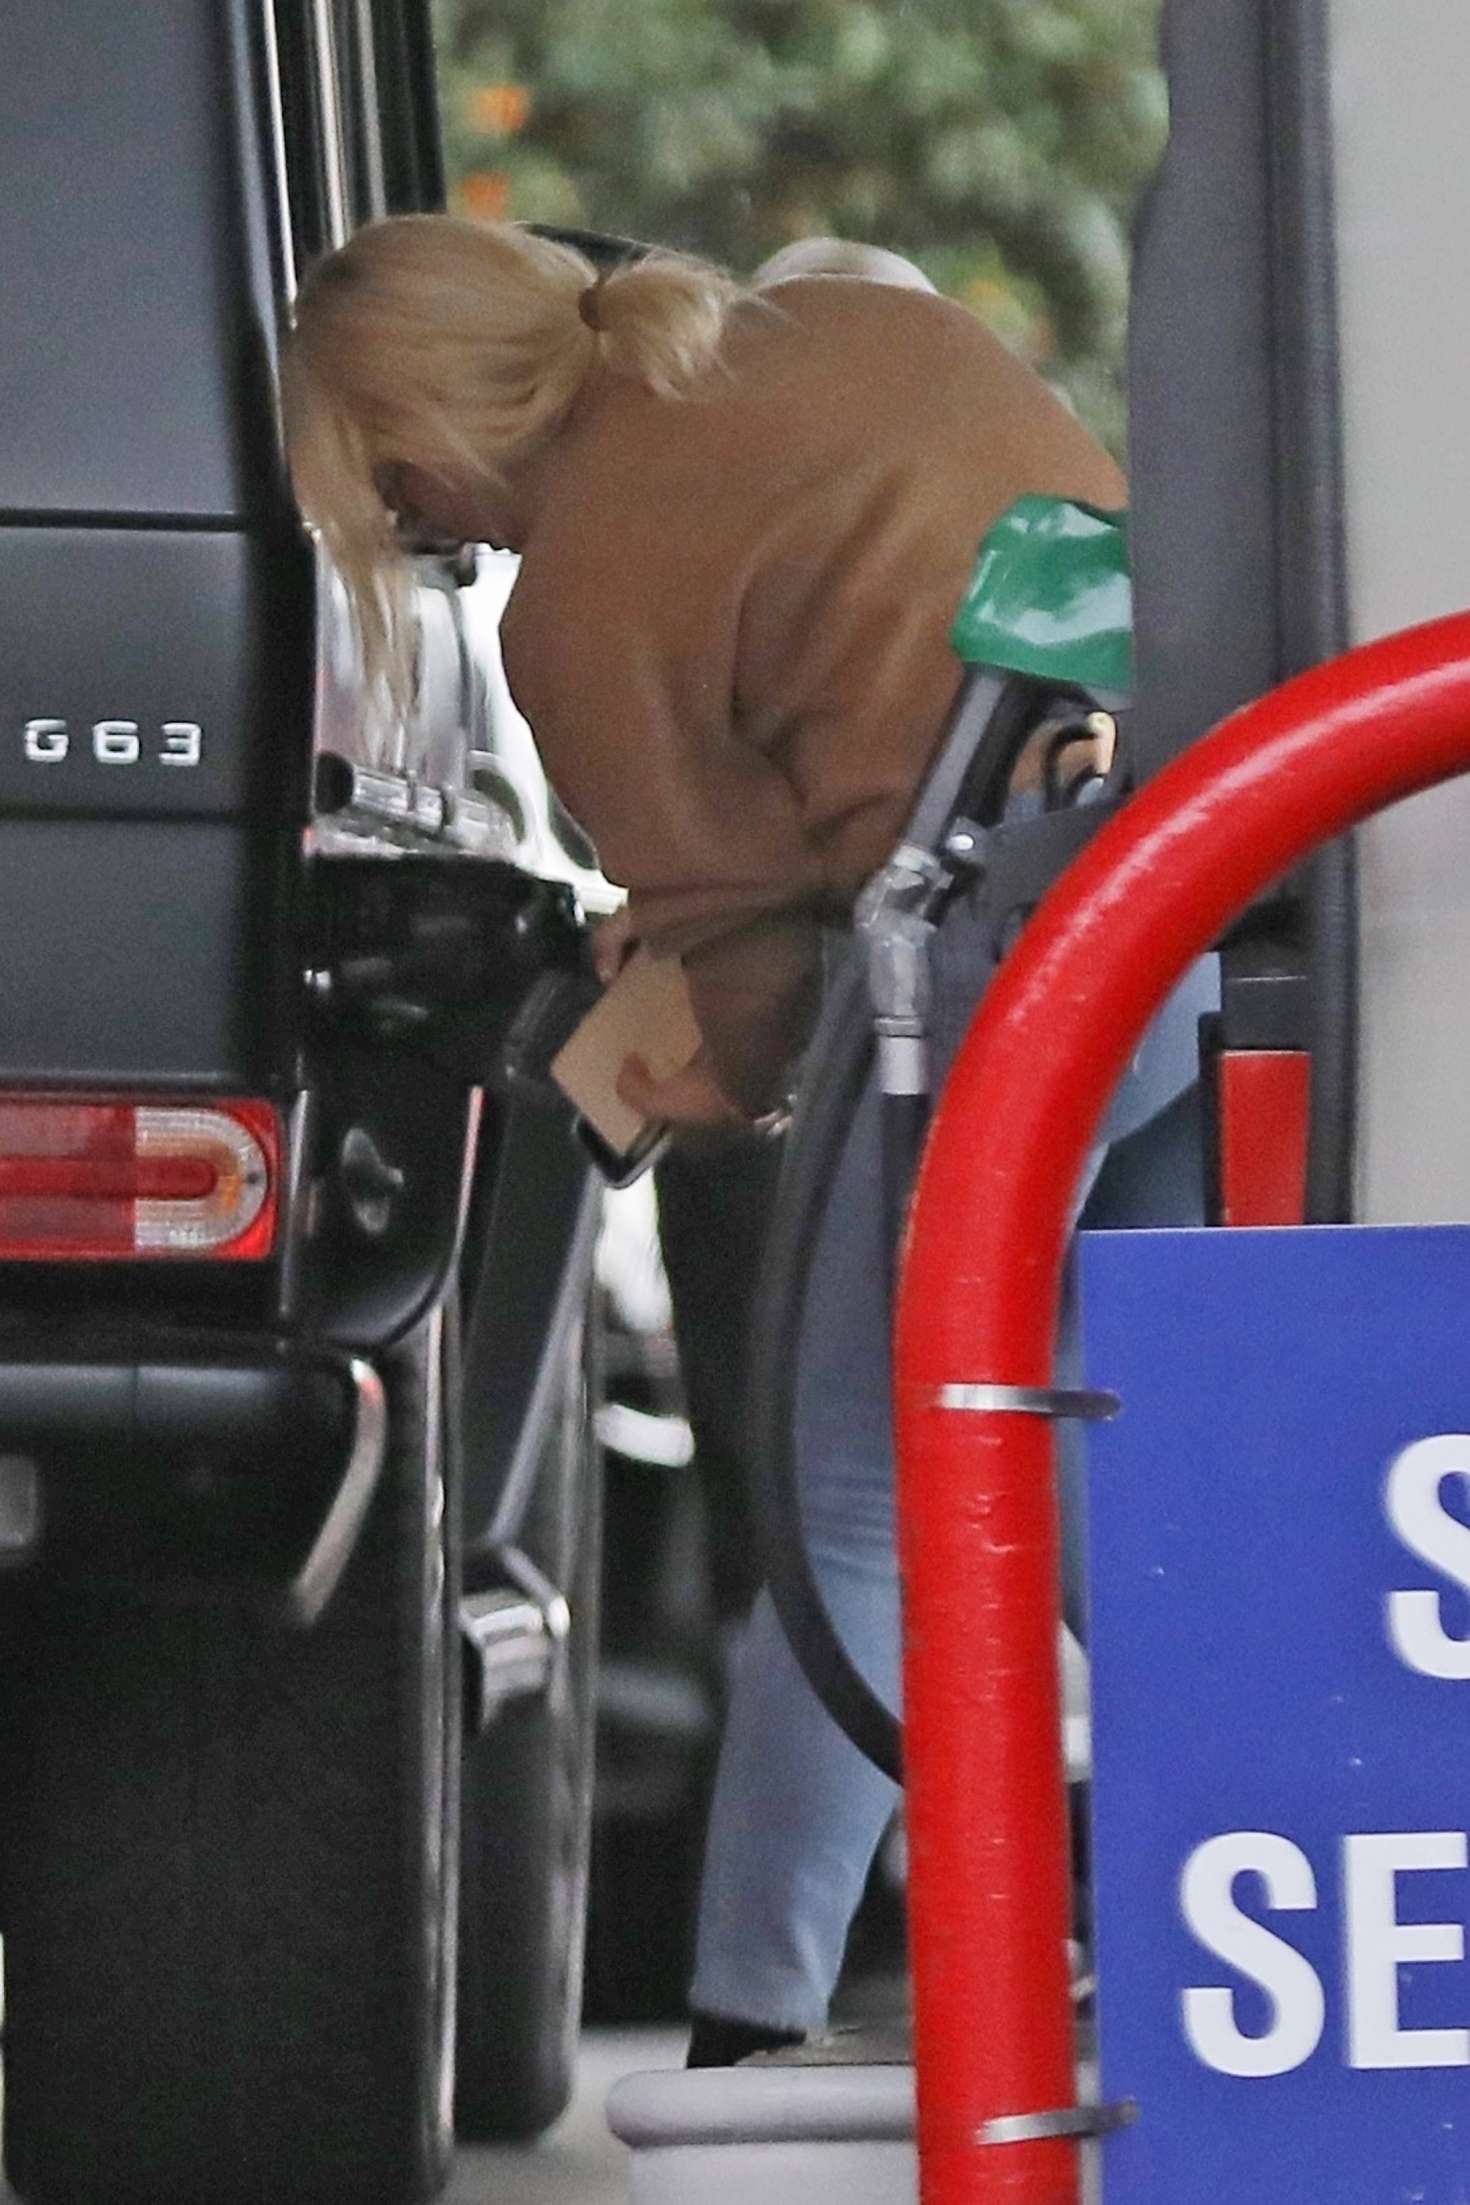 Hilary Duff at a gas station in LA